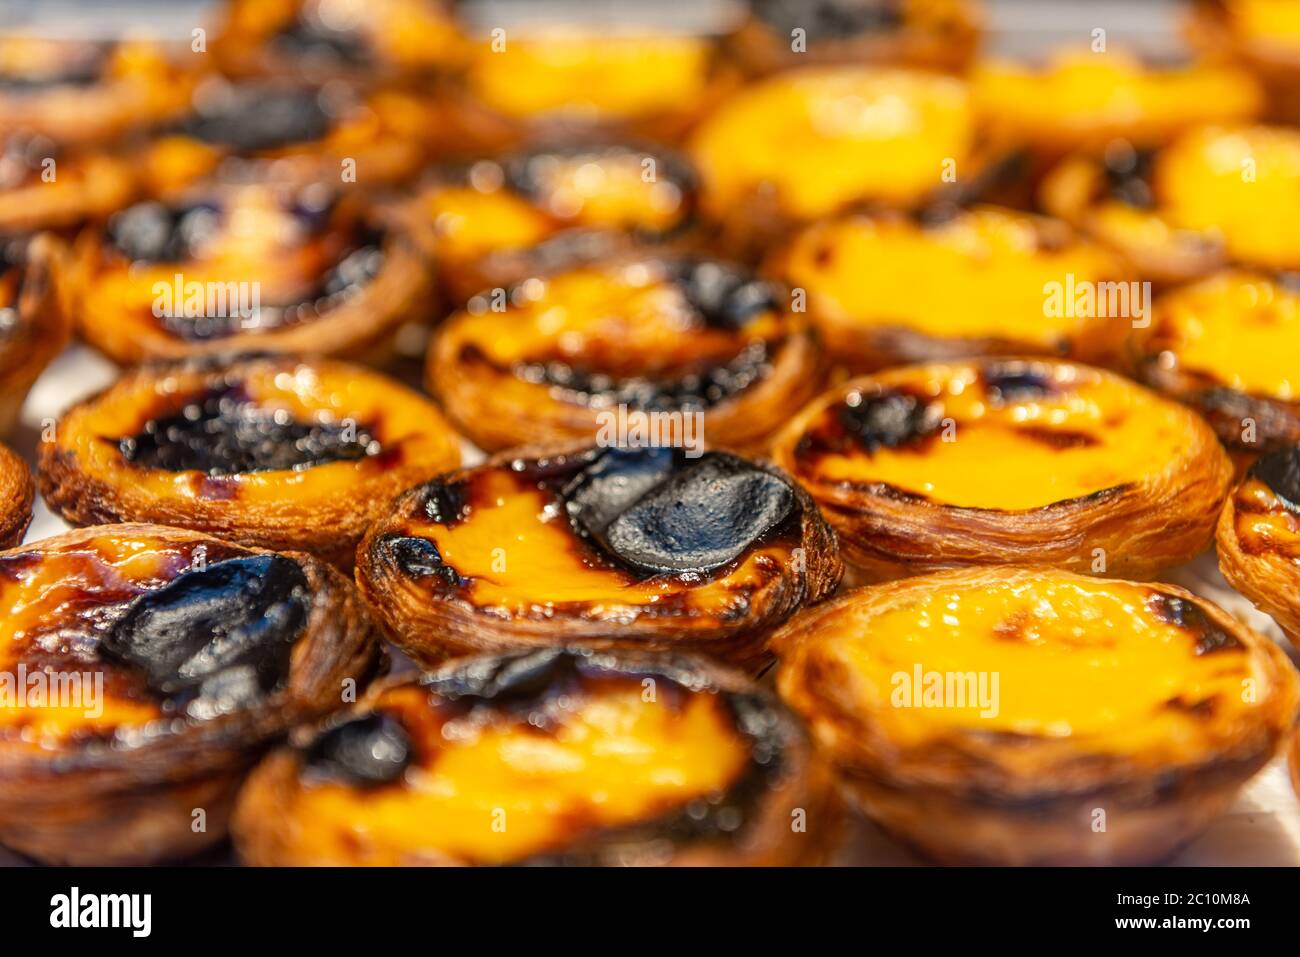 Fresh pasteis de nata (typical Portuguese egg tarts) just backed in a local bakery in Lisbon. Stock Photo